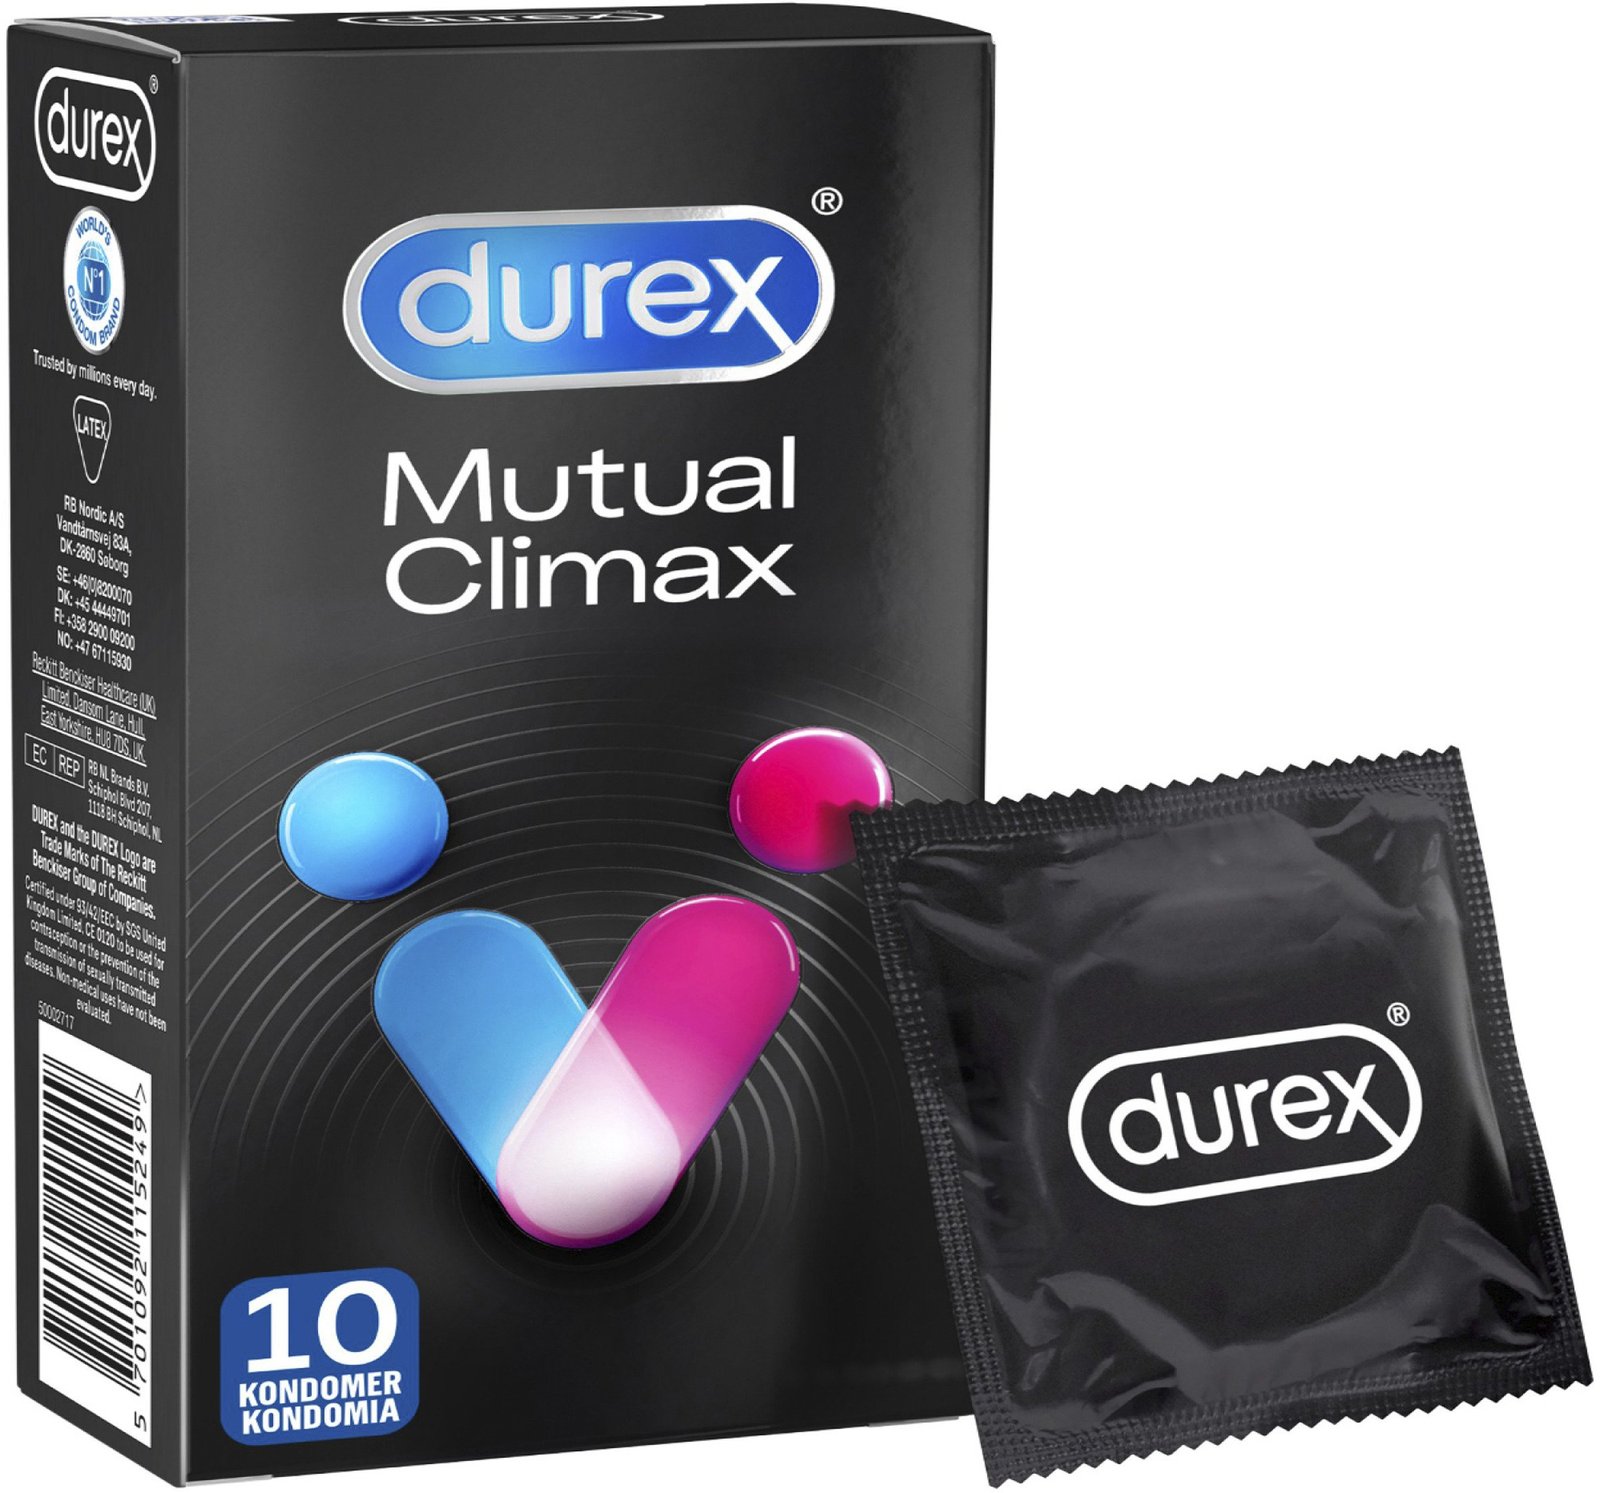 Durex Mutual Climax For Him & Her 10 st